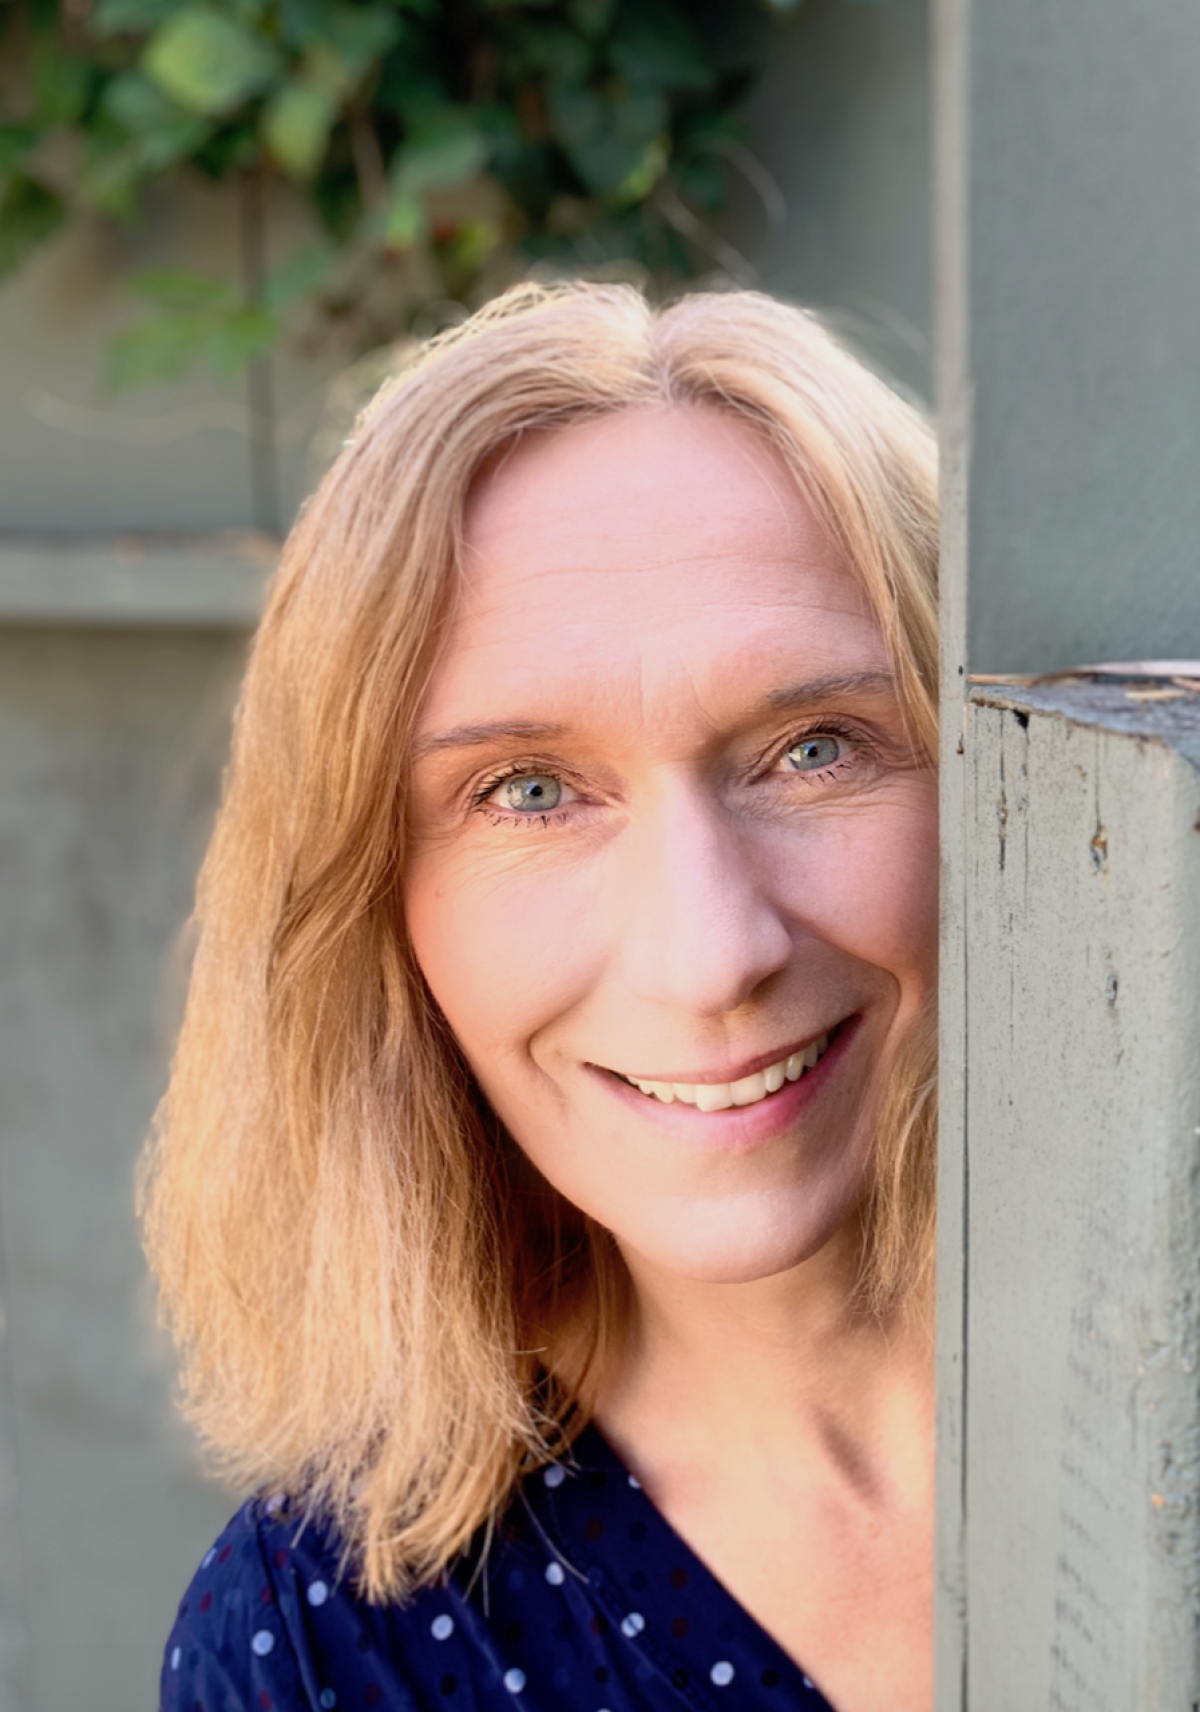 La Jolla resident and author Anne Egseth sees writing as "a way to dialogue with the world.”